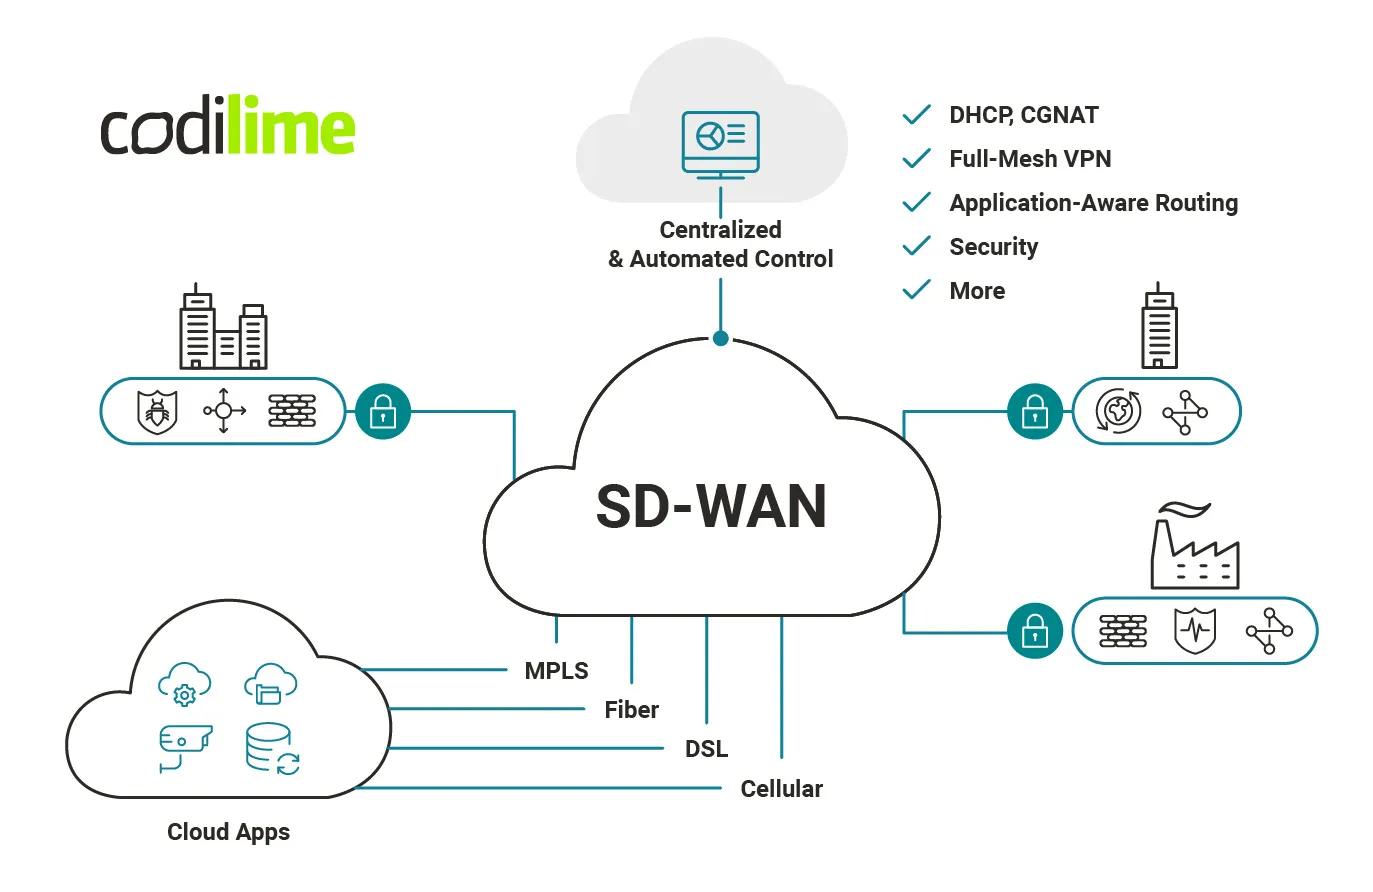 SD-WAN as a base network infrastructure for your private cloud services